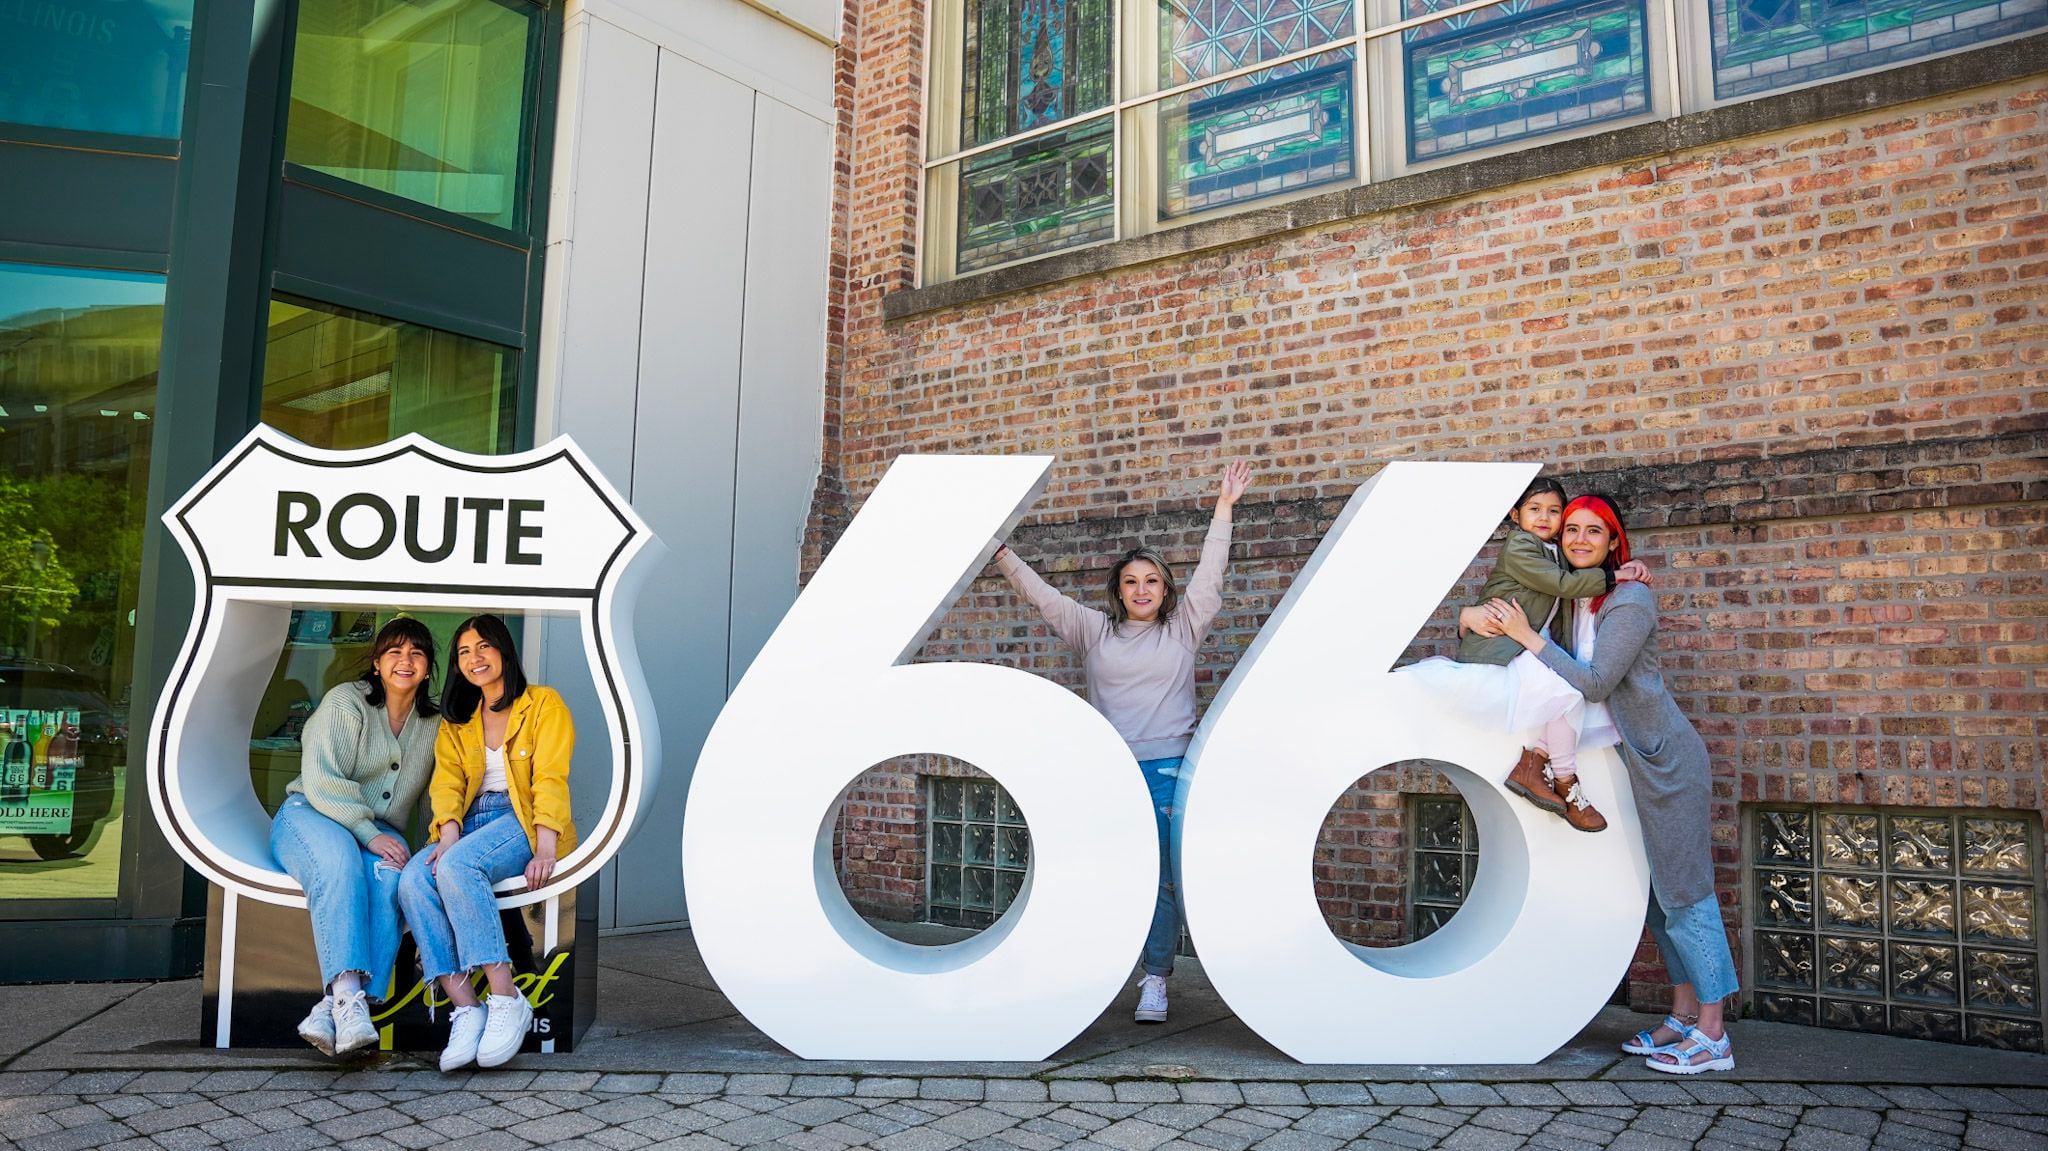 The Heritage Corridor Convention and Visitors Bureau, in coordination with over a dozen municipalities, has been awarded a $1.5 million grant under the Route 66 Grant Program administered by the Illinois Department of Commerce and Economic Opportunity and the Illinois Office of Tourism.